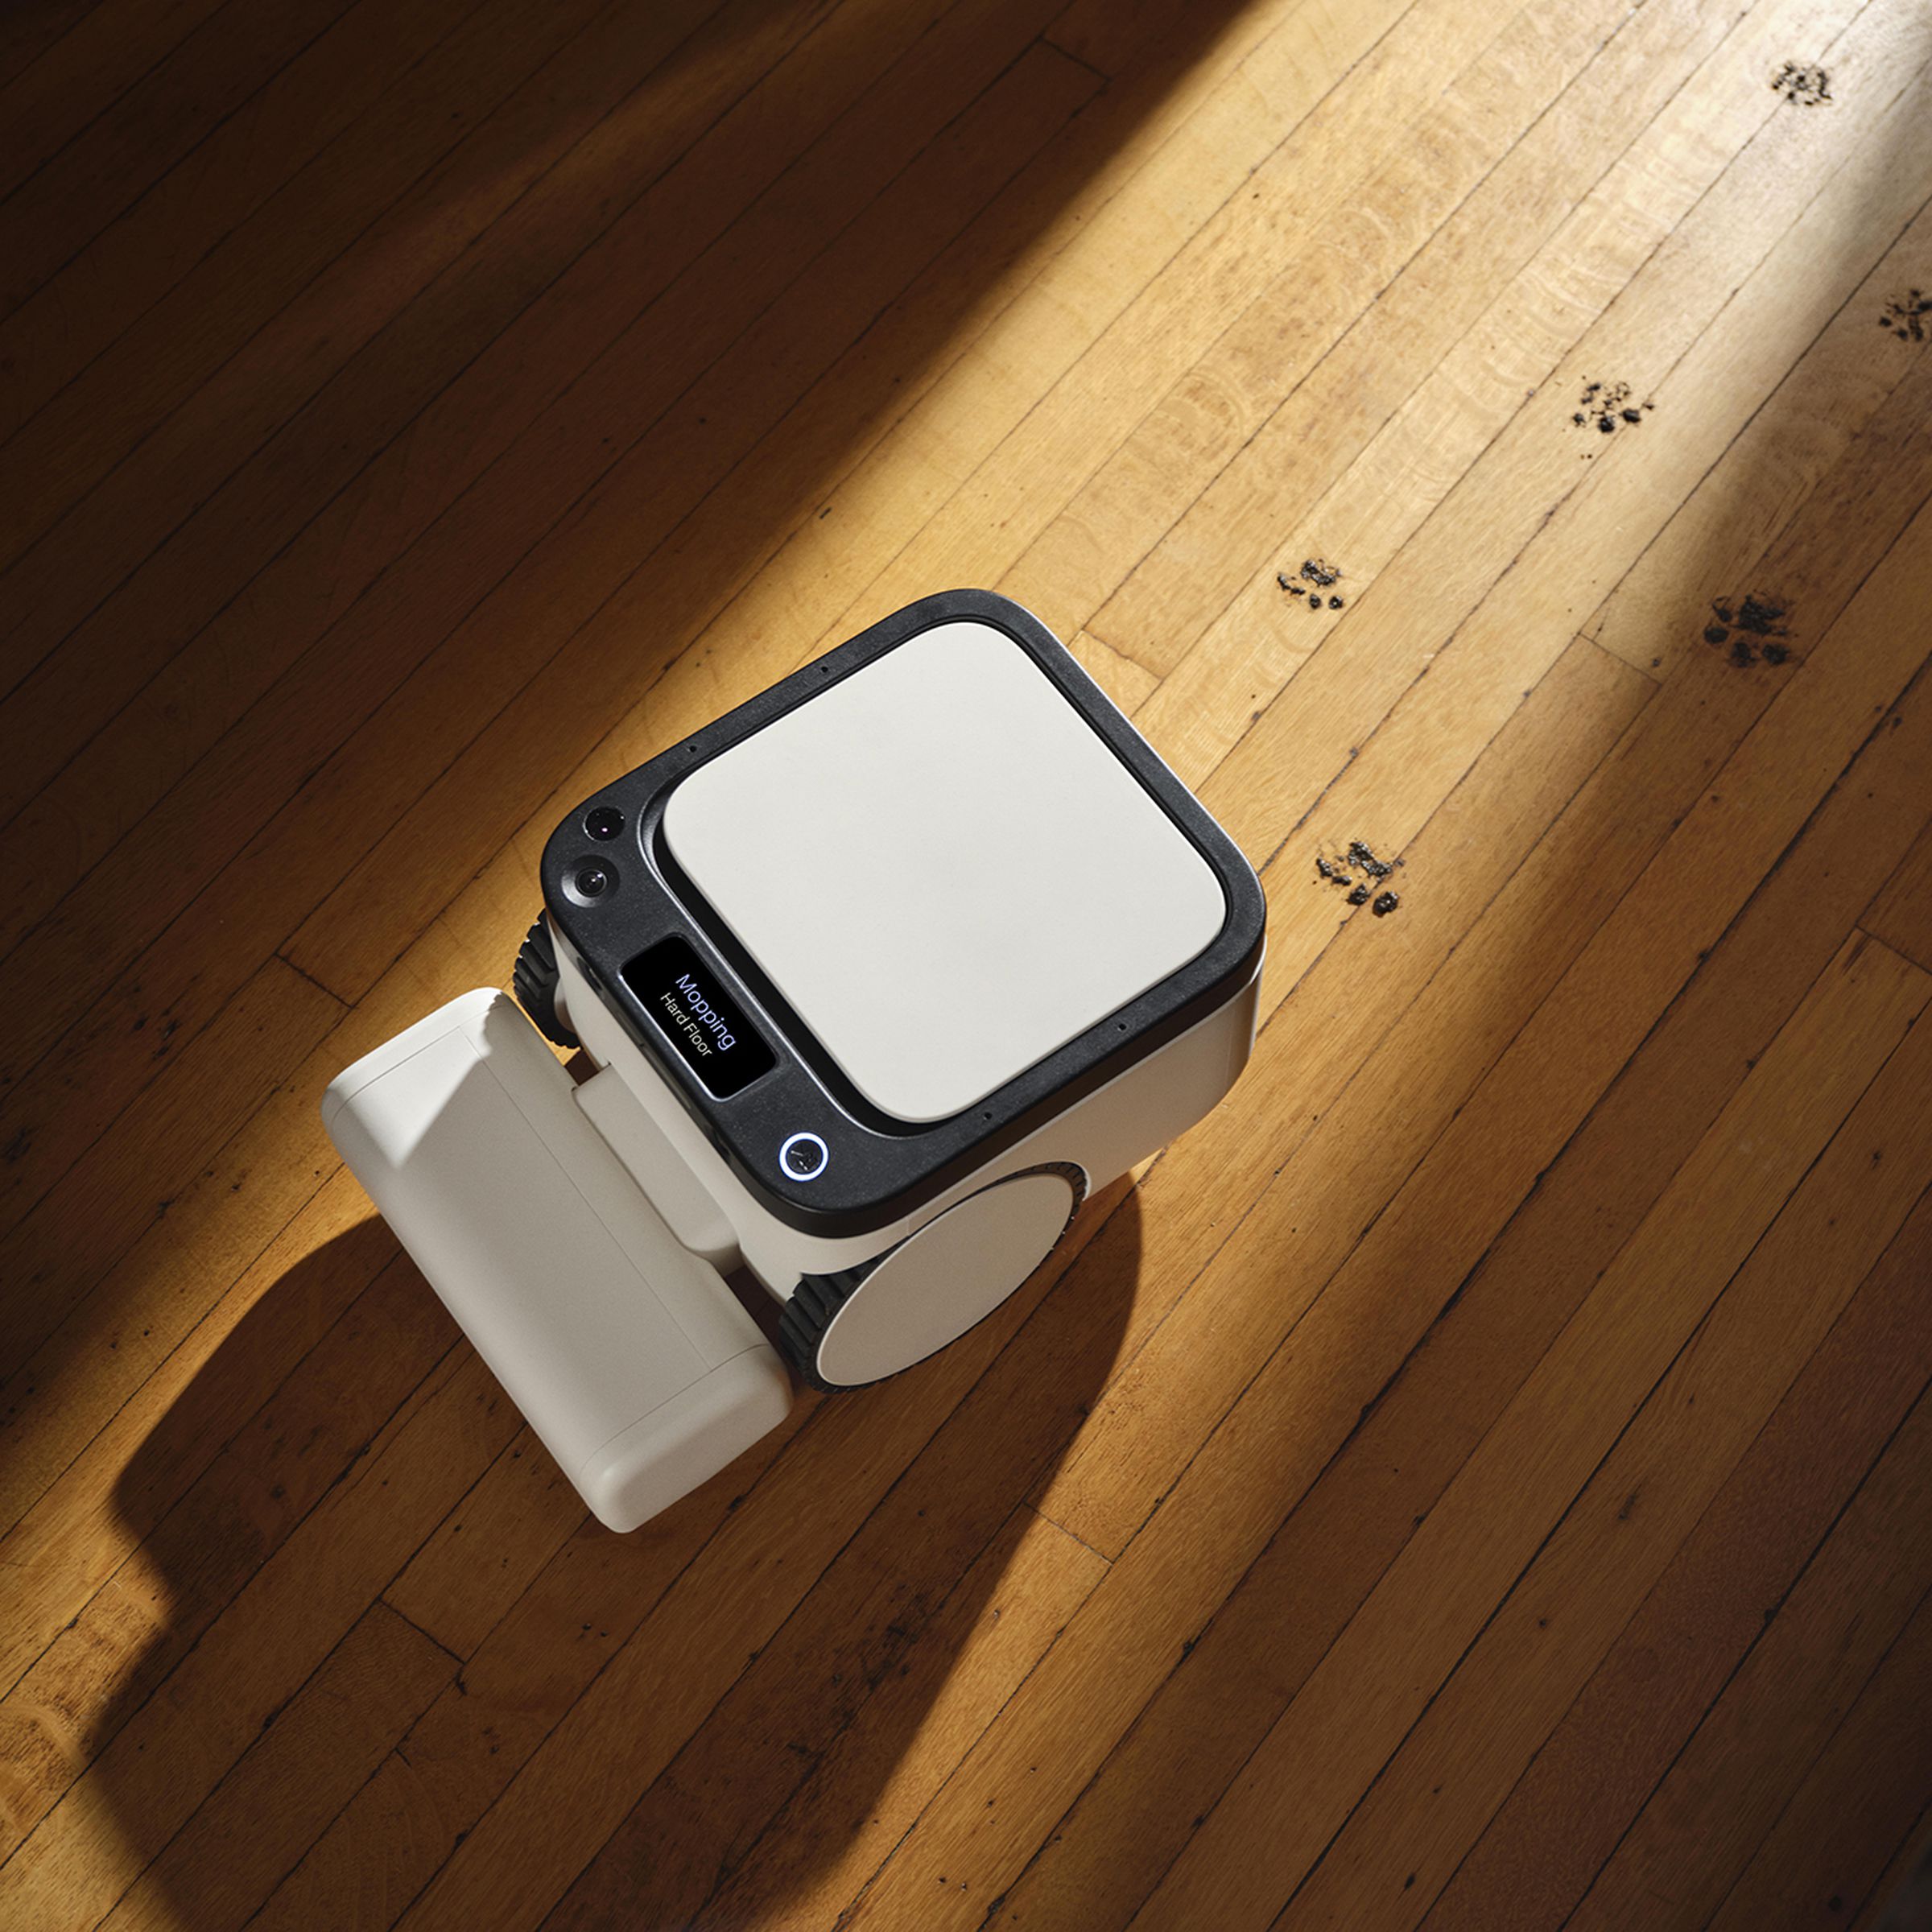 The Matic is an $1,800 home robot that claims to be the first fully autonomous floor-cleaning robot.